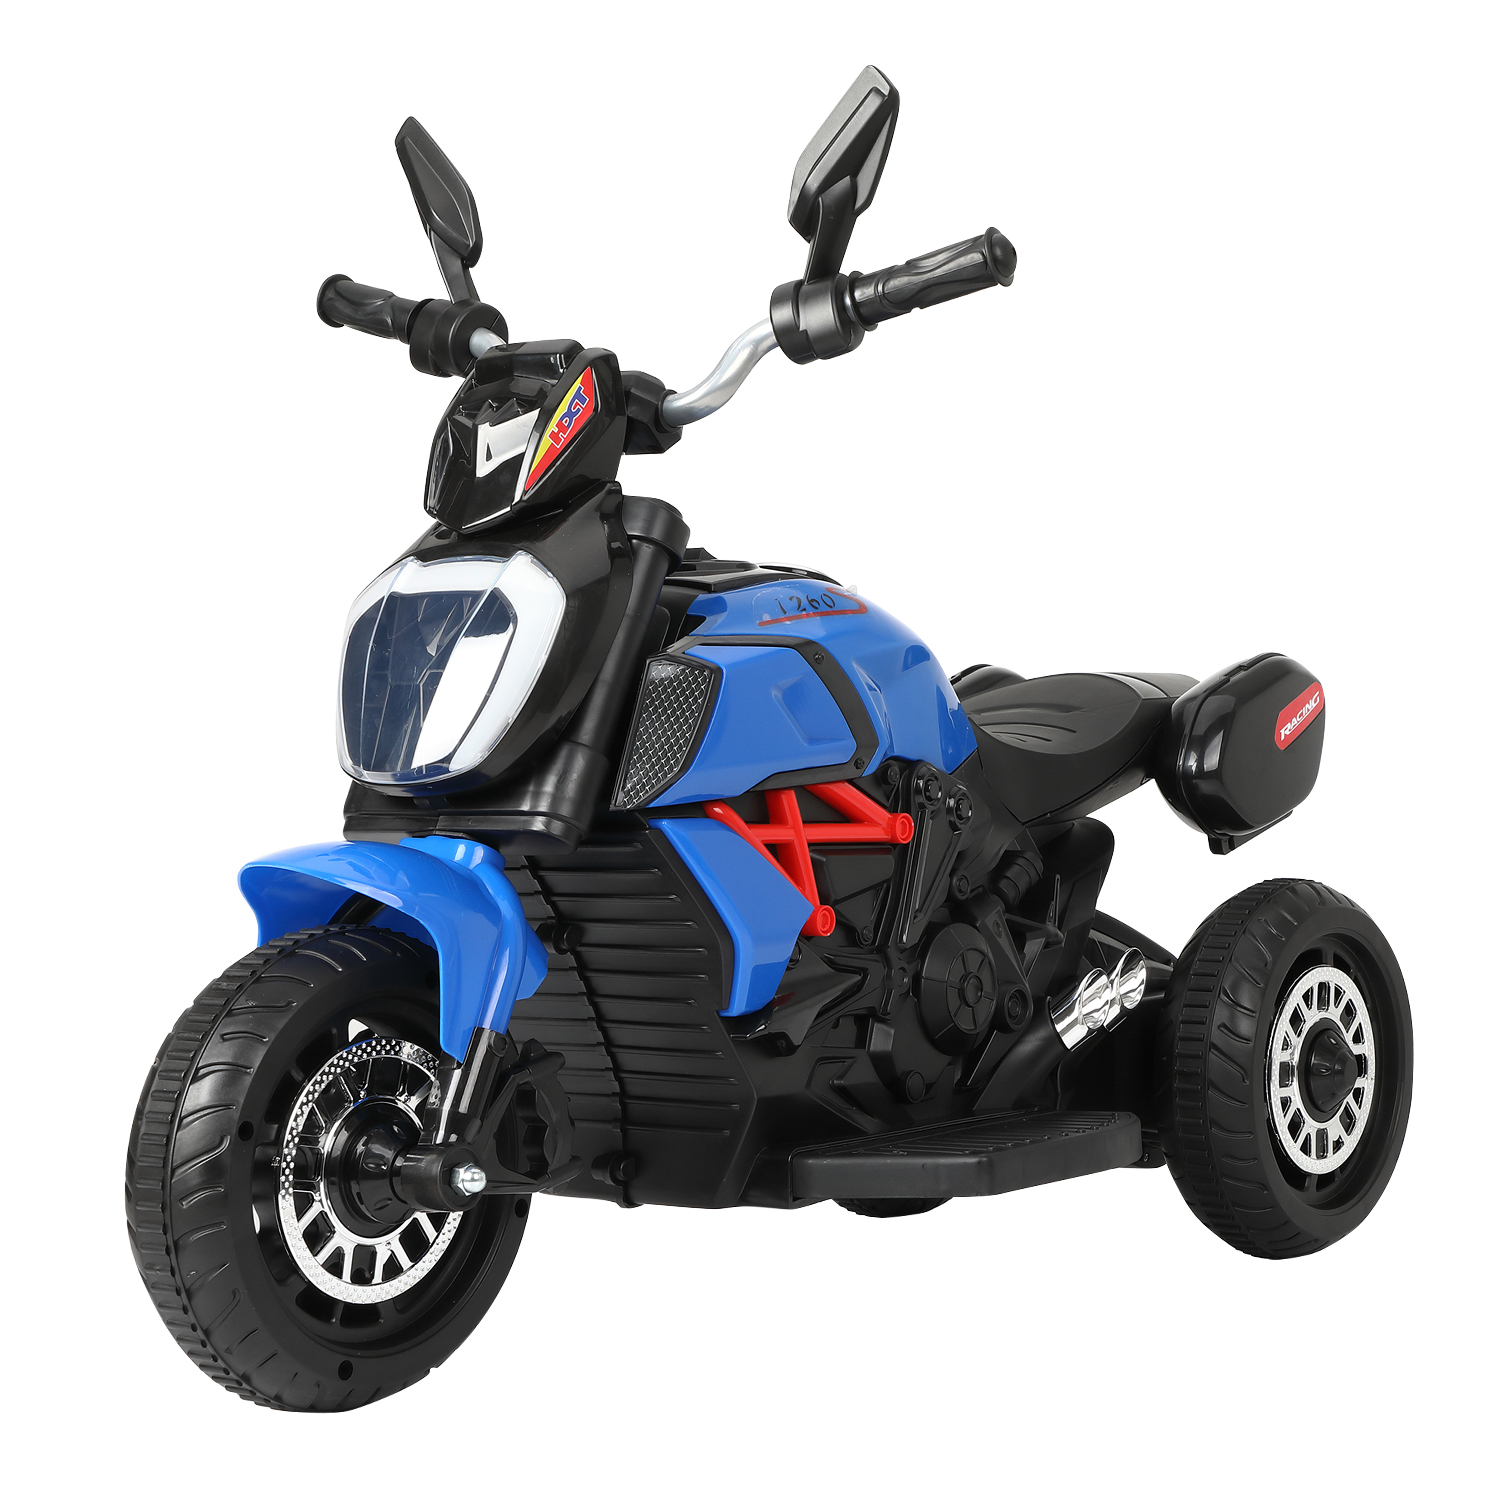 6V Kids Ride On Motorcycle with Headlights, Battery-Powered 3-Wheel Bicycle - Blue-CASAINC